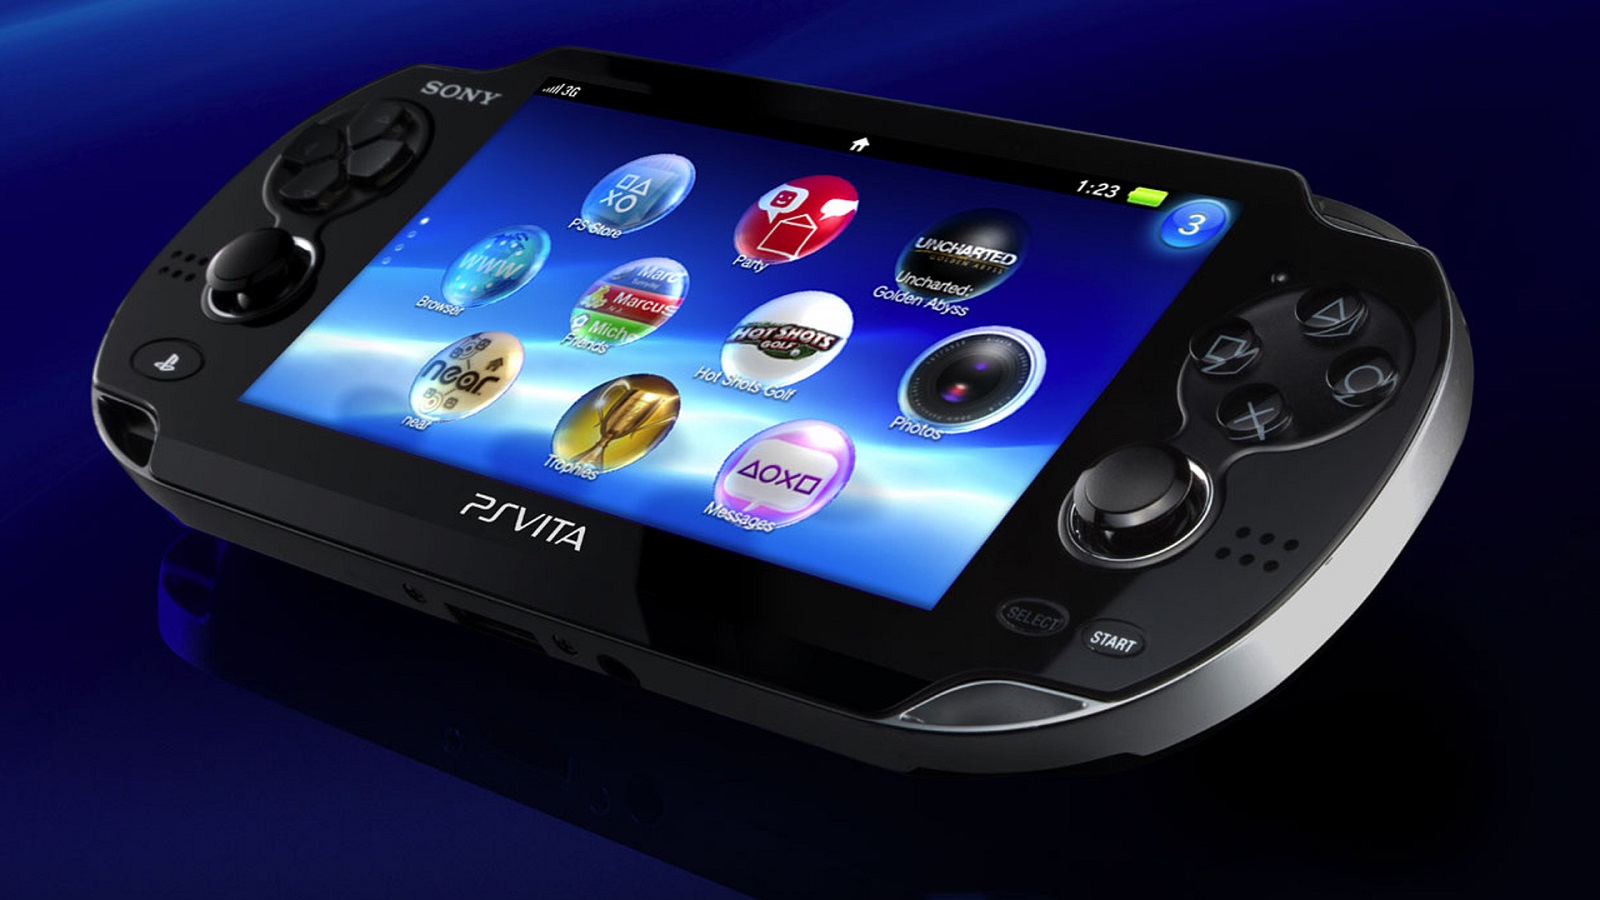 PS3 & Vita Stores Will Now Stay Open, PSP Store Shutdown Still Planned